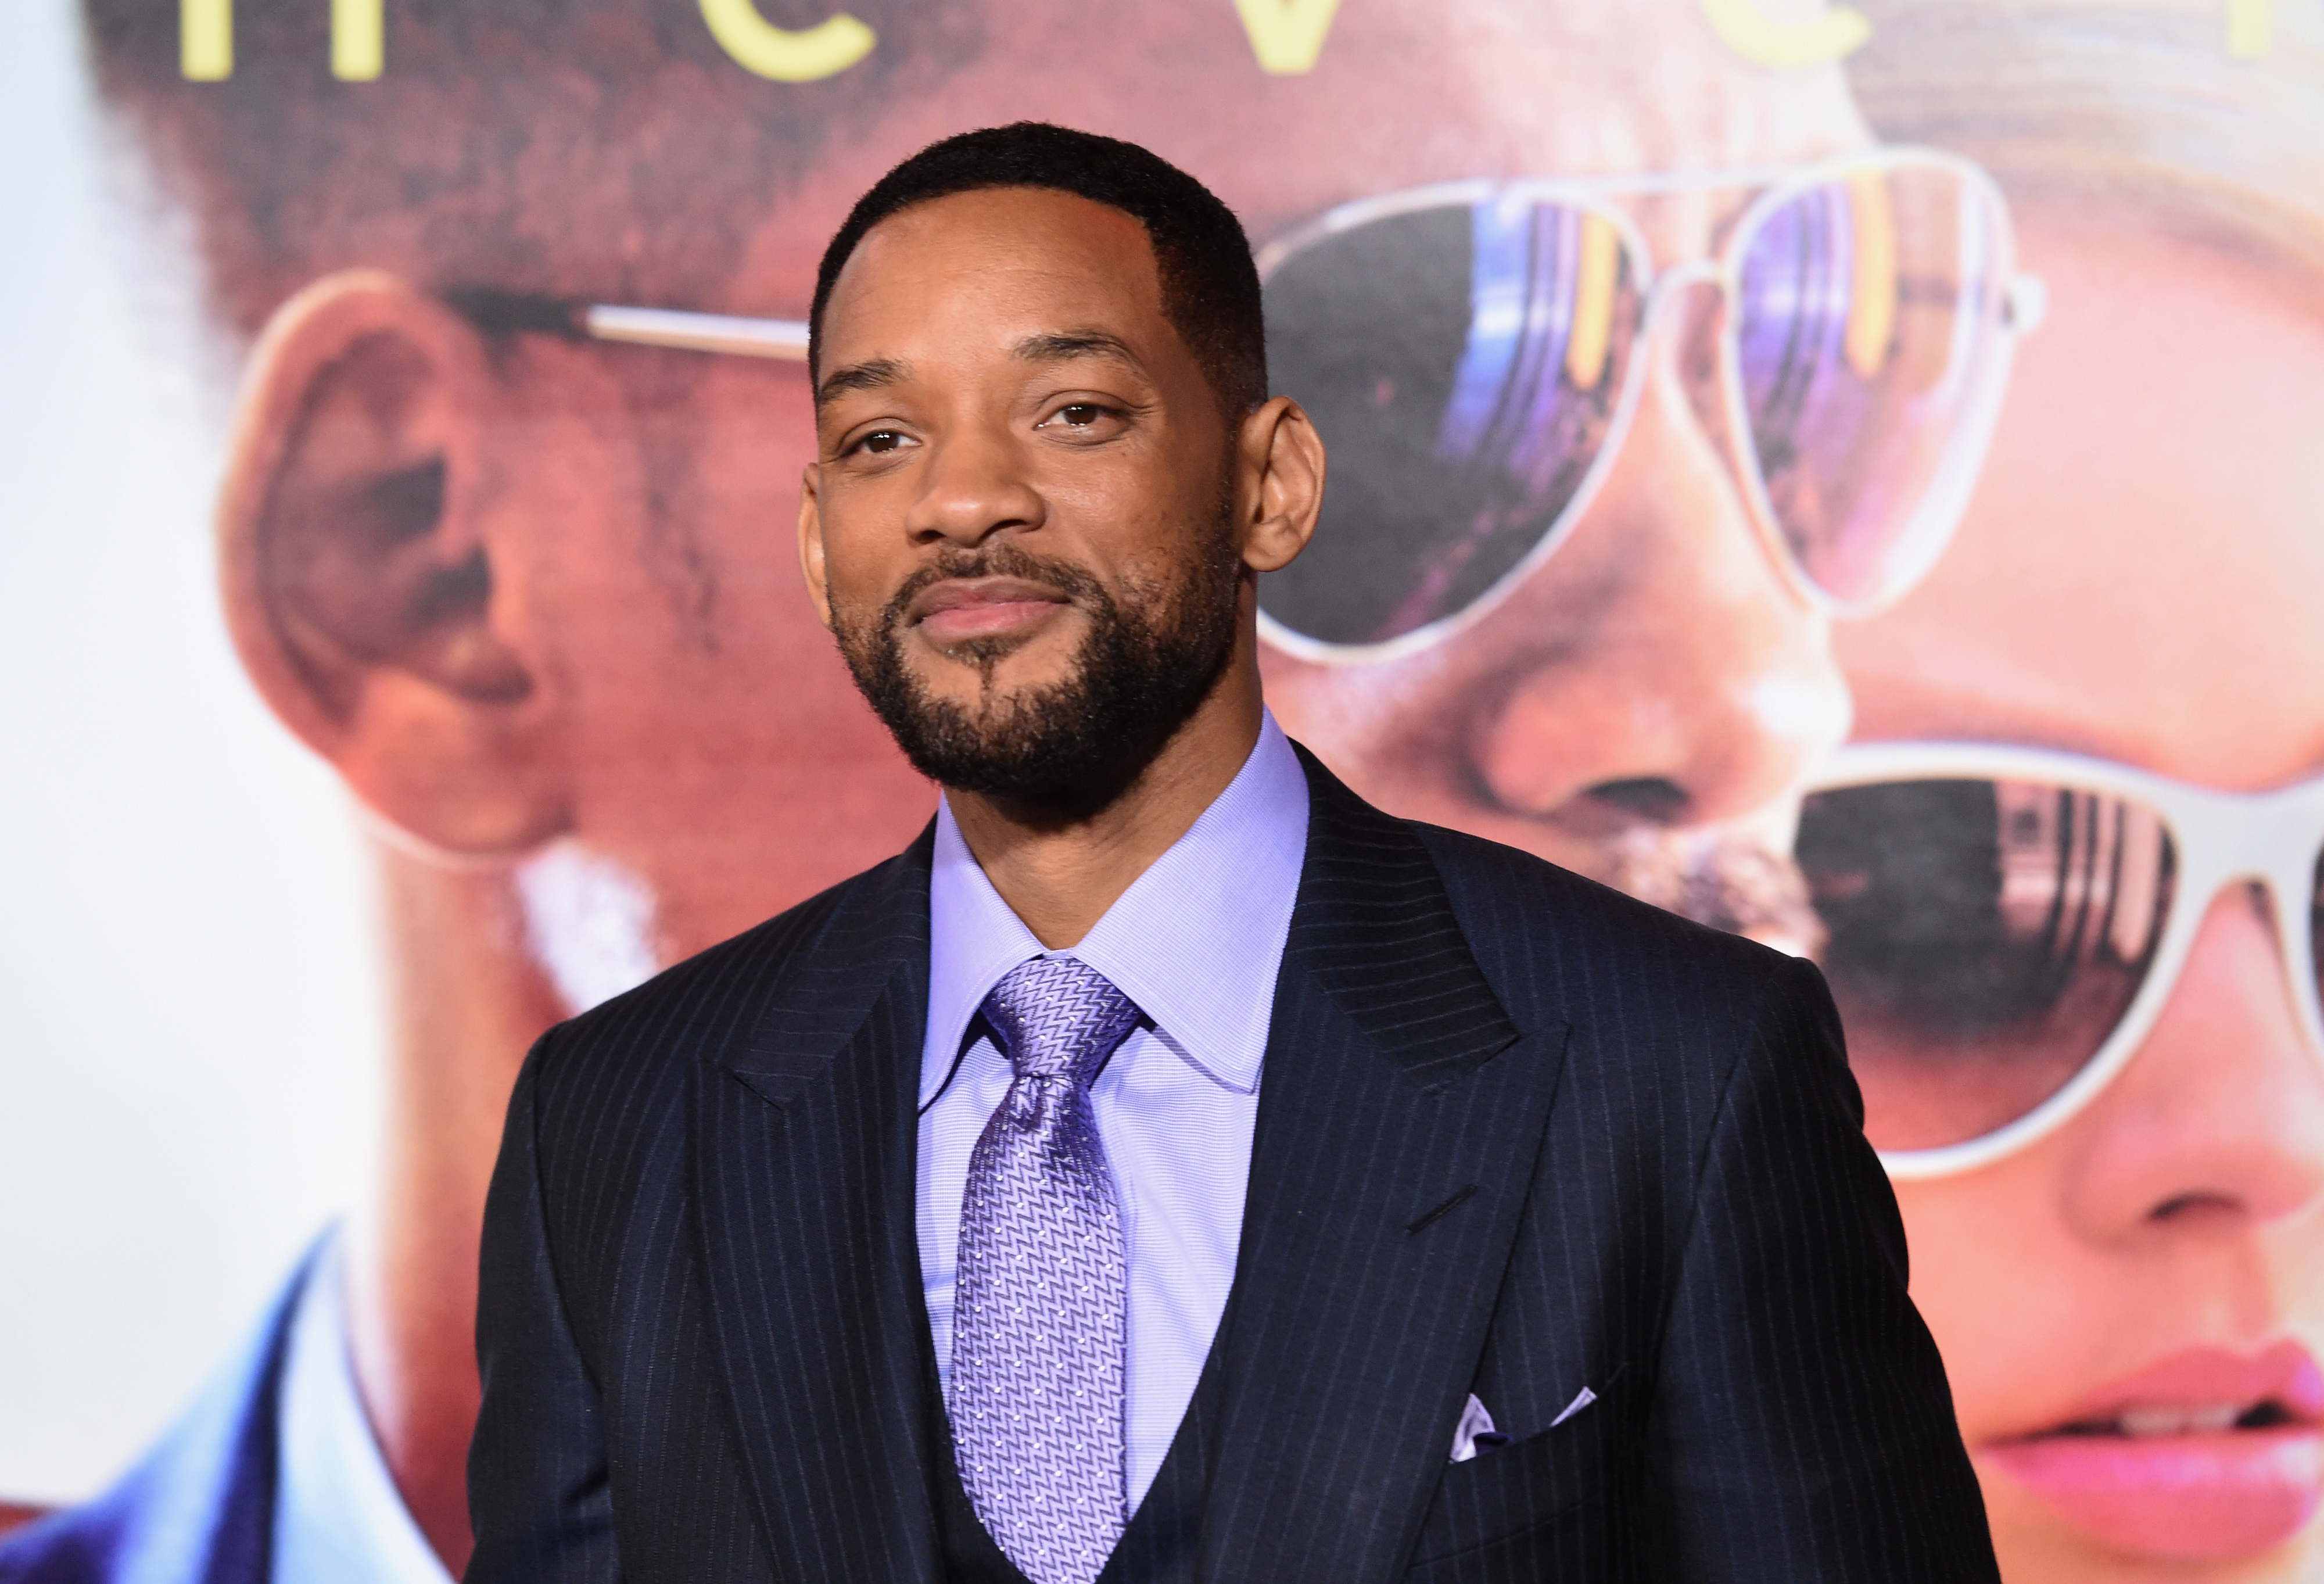 Will Smith smiles on the red carpet as he wears a suit and tie